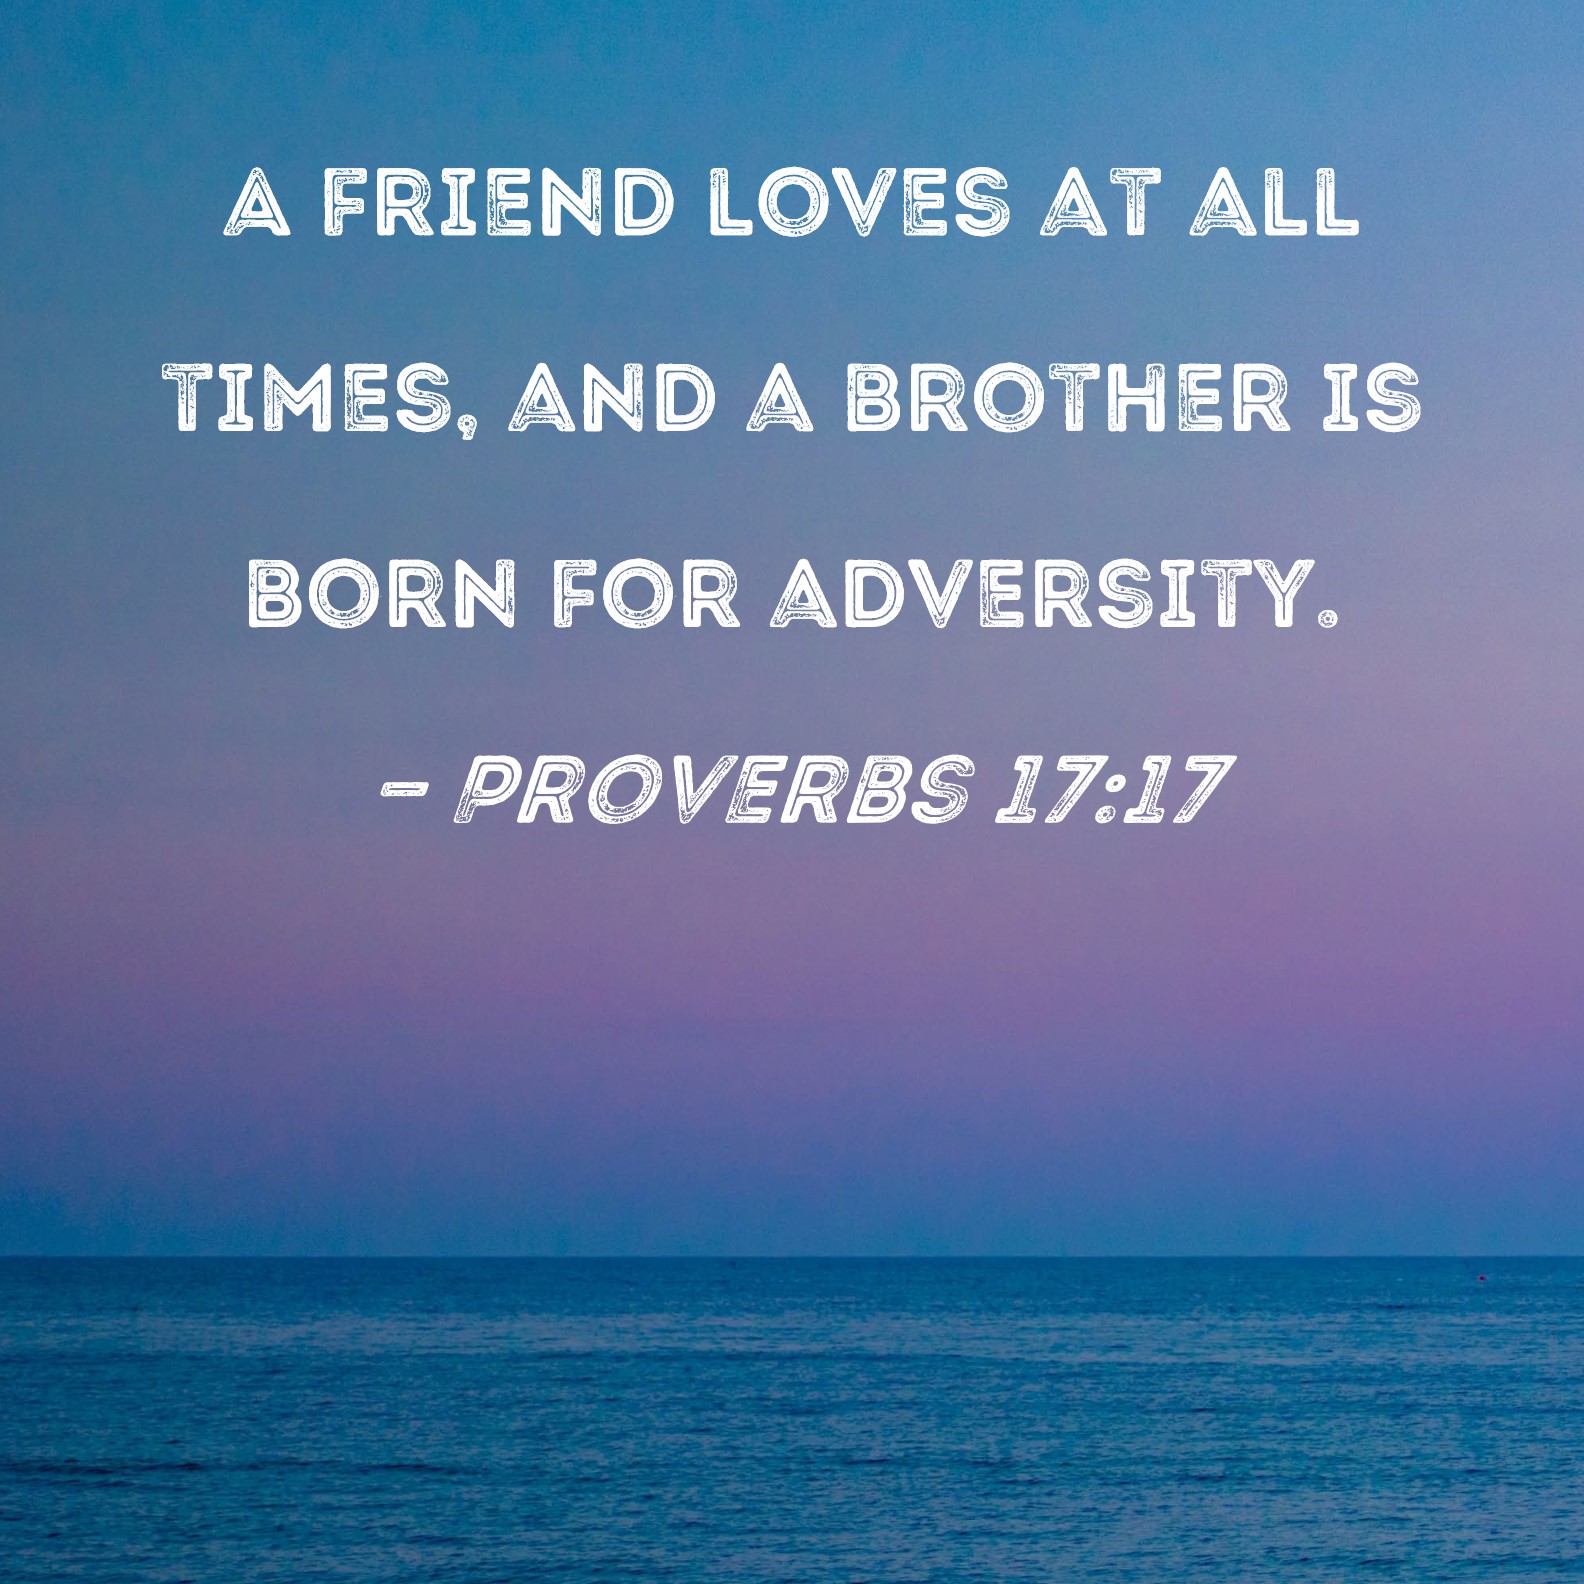 Proverbs 18:24 A man that hath friends must shew himself friendly: And  there is a friend that sticketh closer than a brother., King James Version  (KJV)